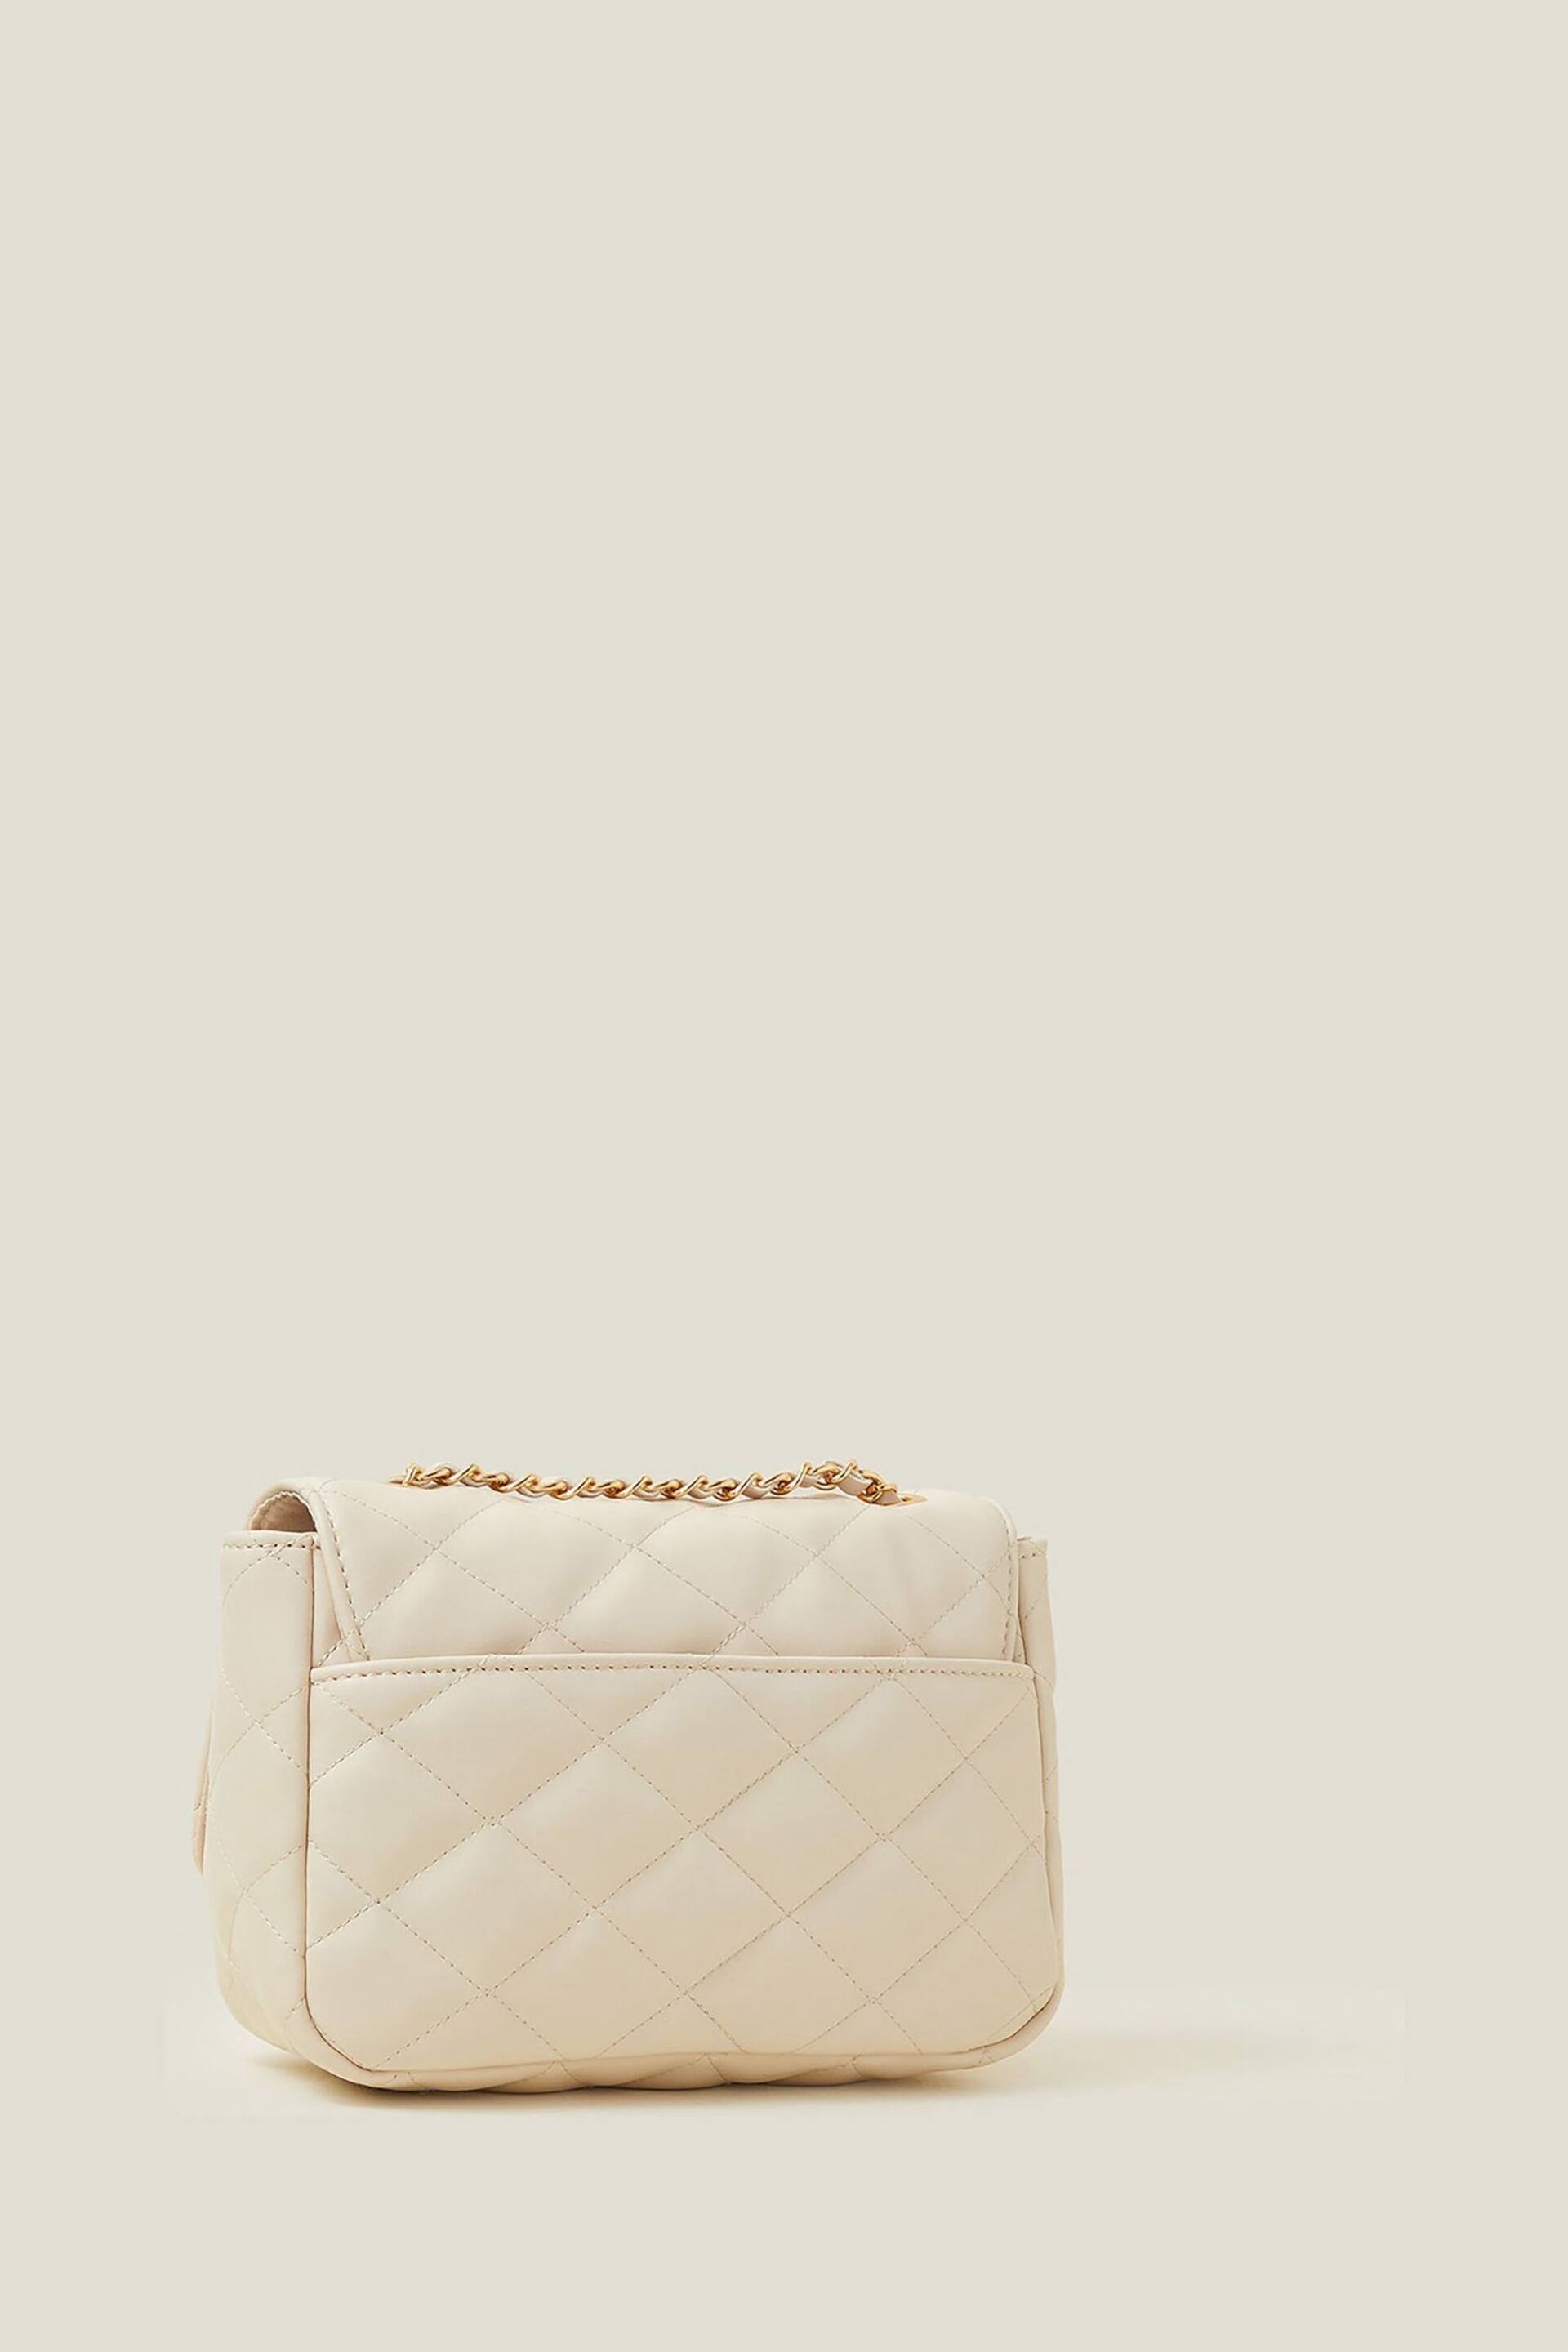 Accessorize Cream Quilted Cross-Body Bag - Image 3 of 4